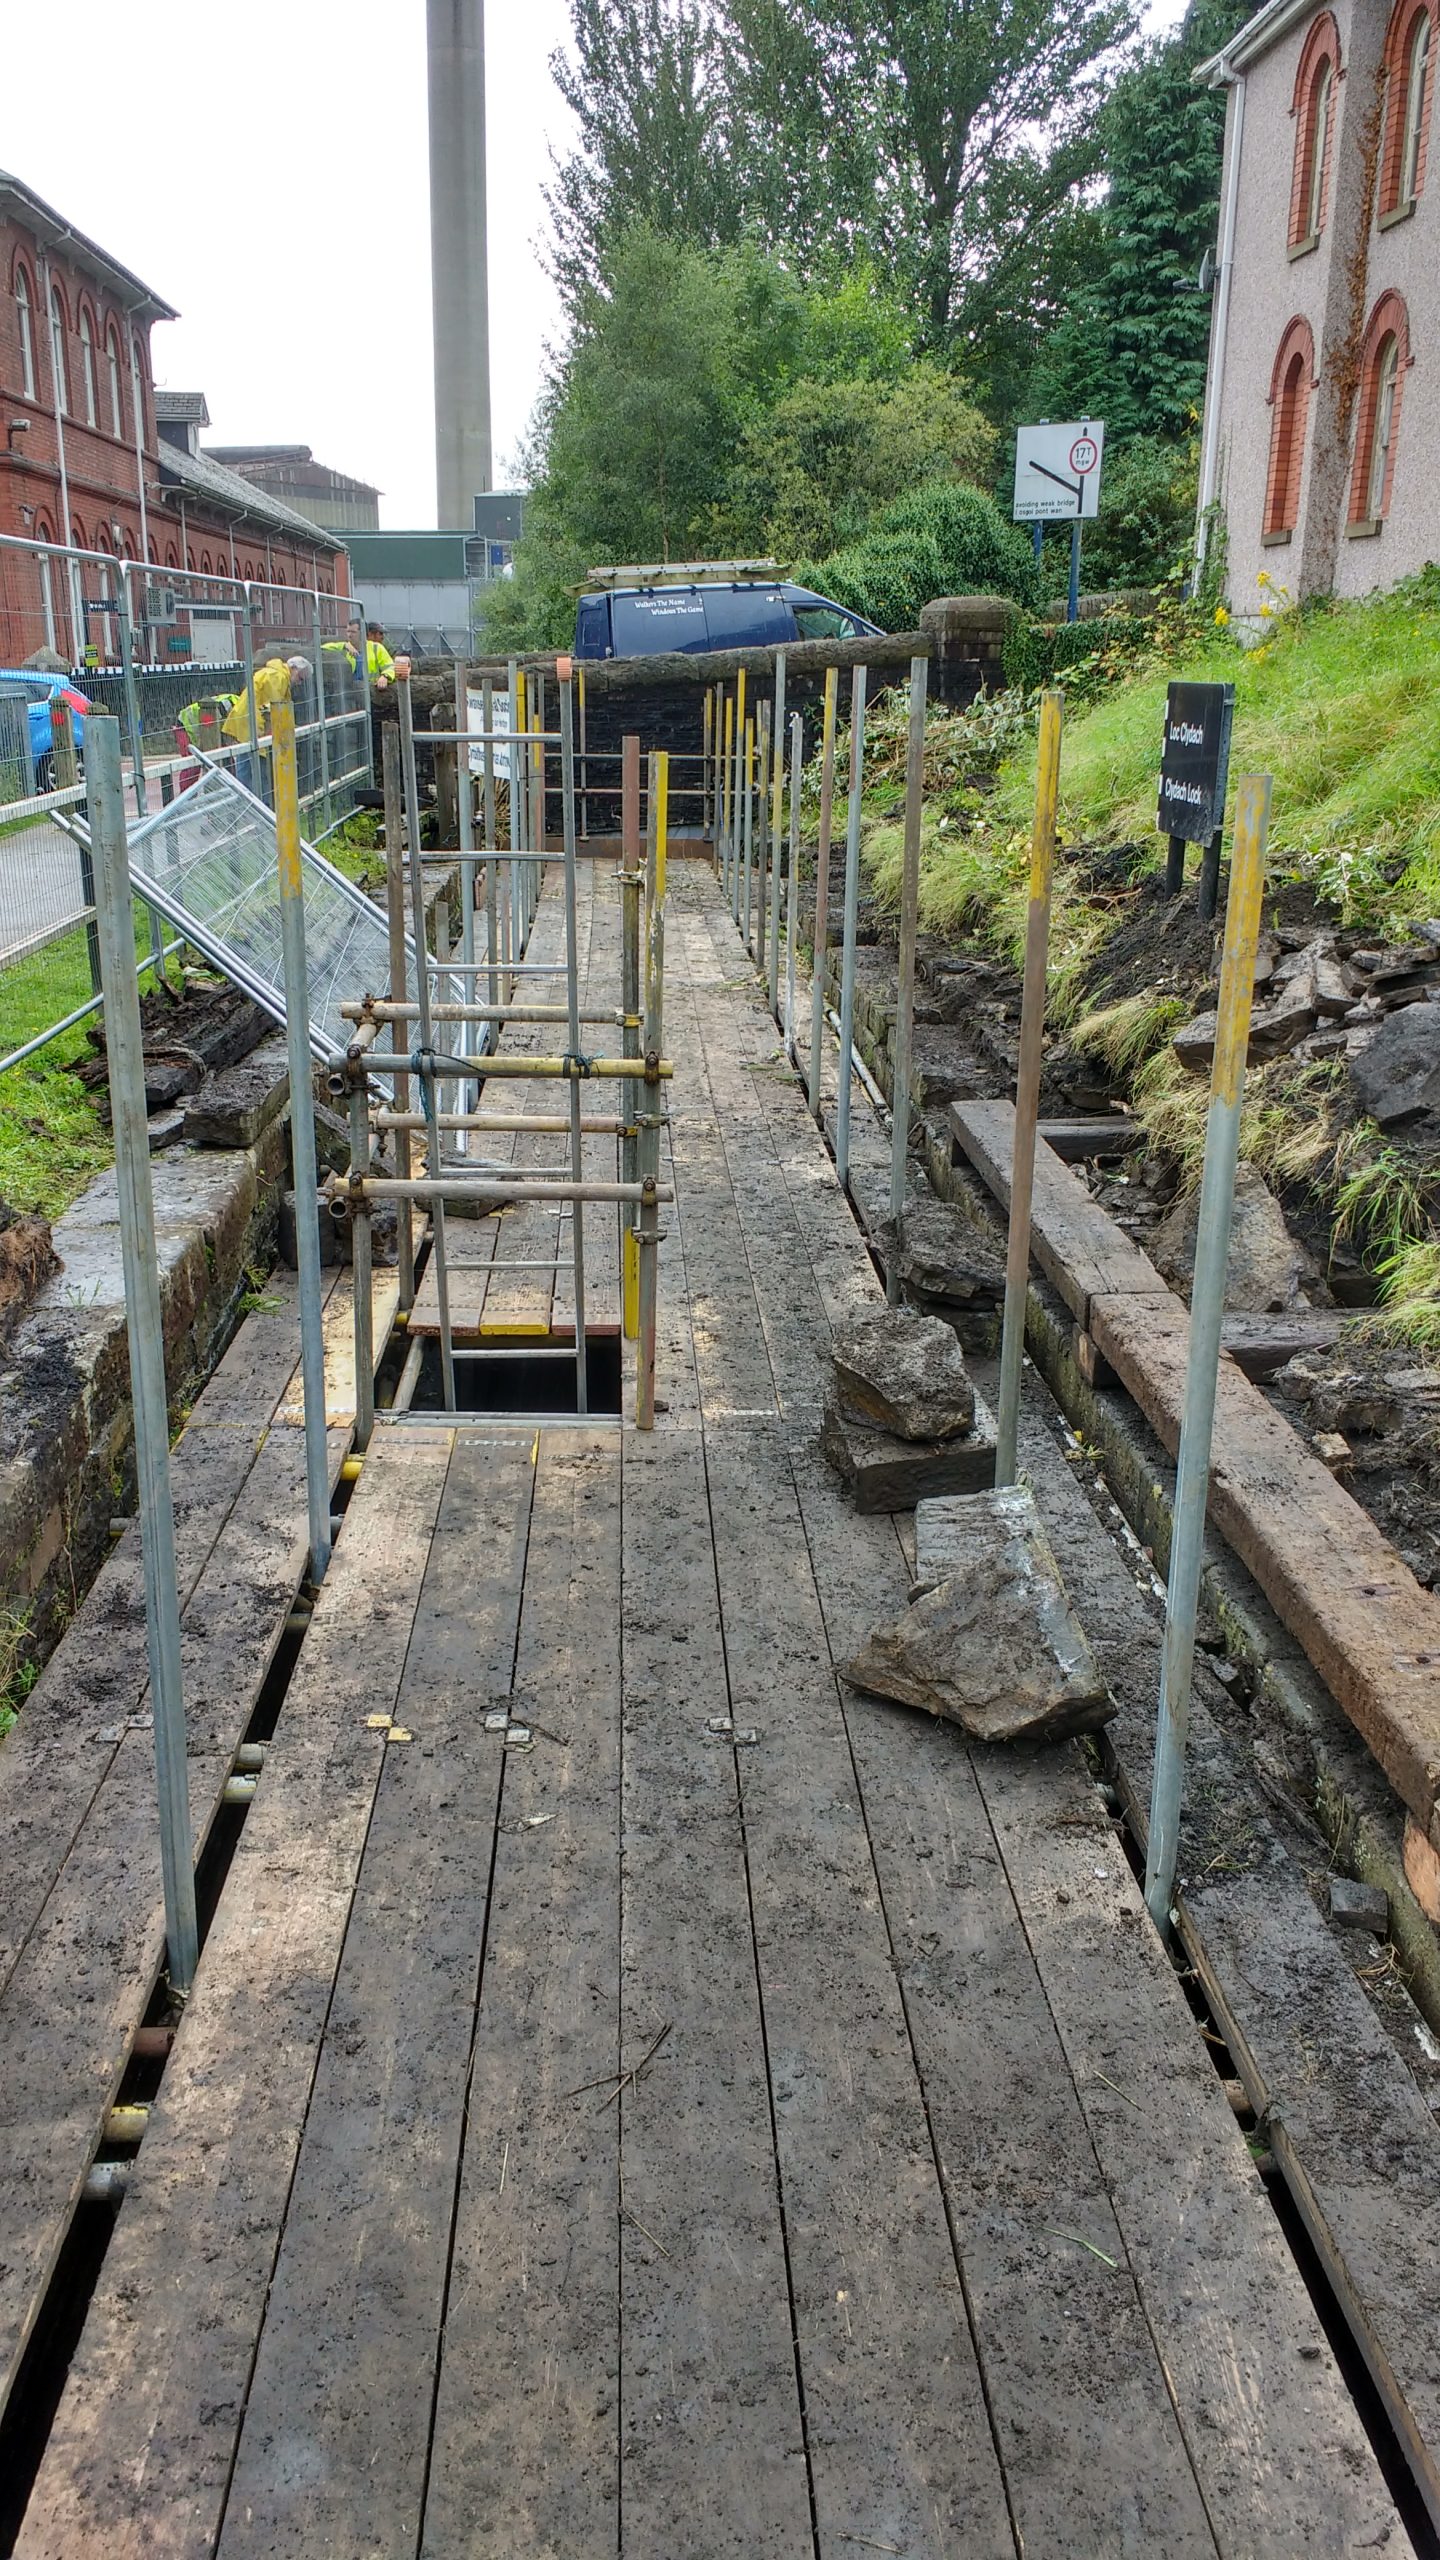 Sound timbers smiilar to these scaffoding planks will be floated down the canal saving transport costs and reusing a valuable resource.